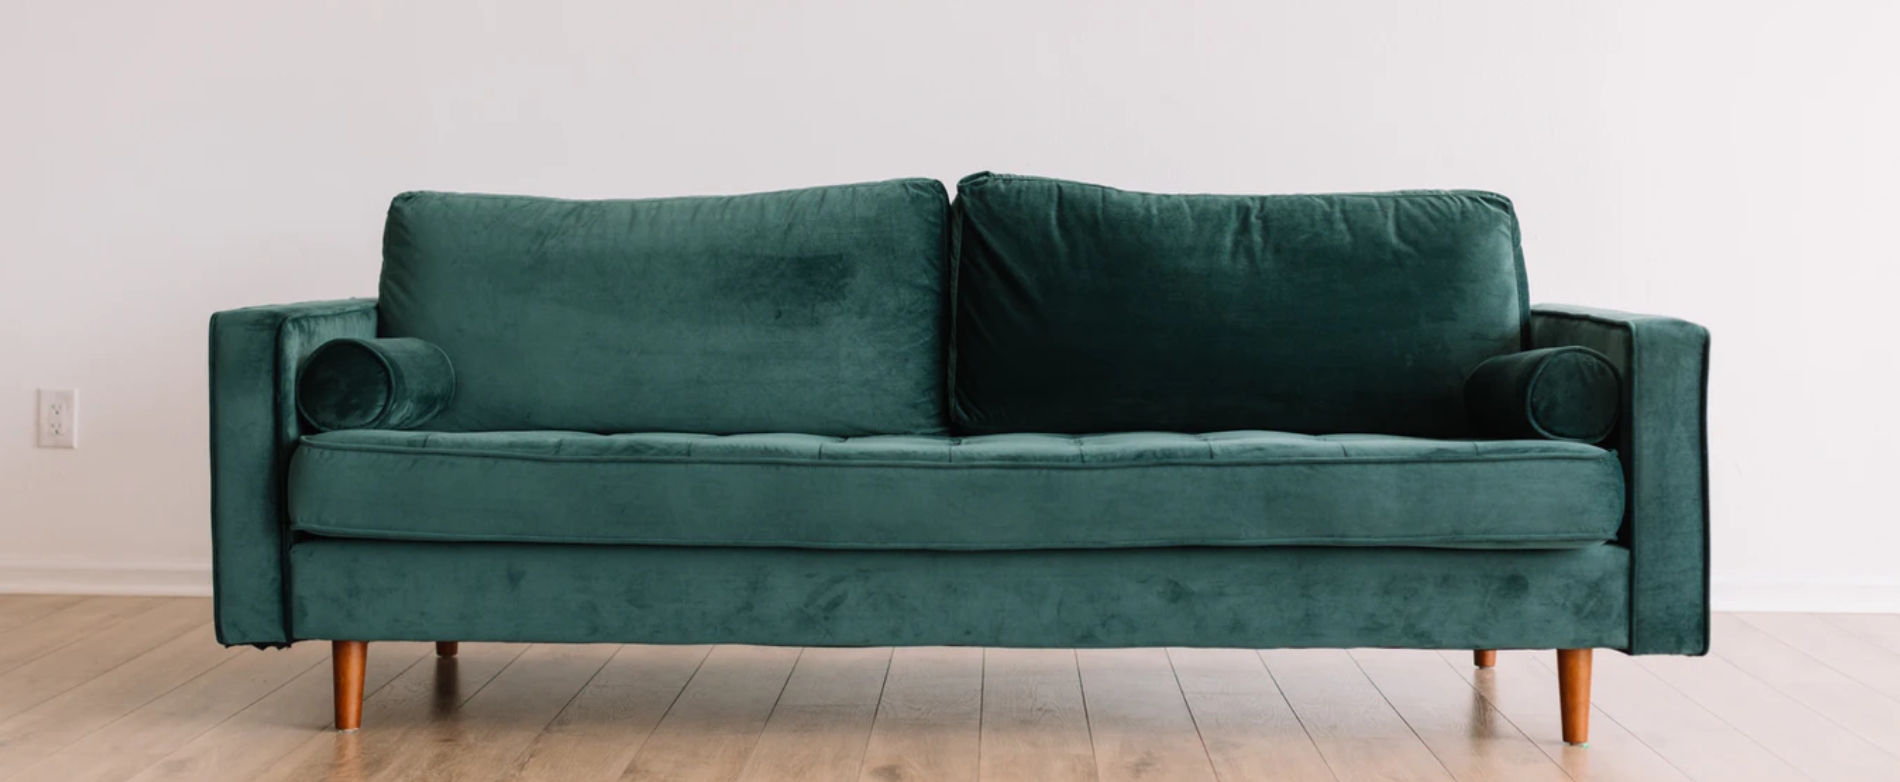 Some of the Best Ways to Keep Your Furniture Clean!